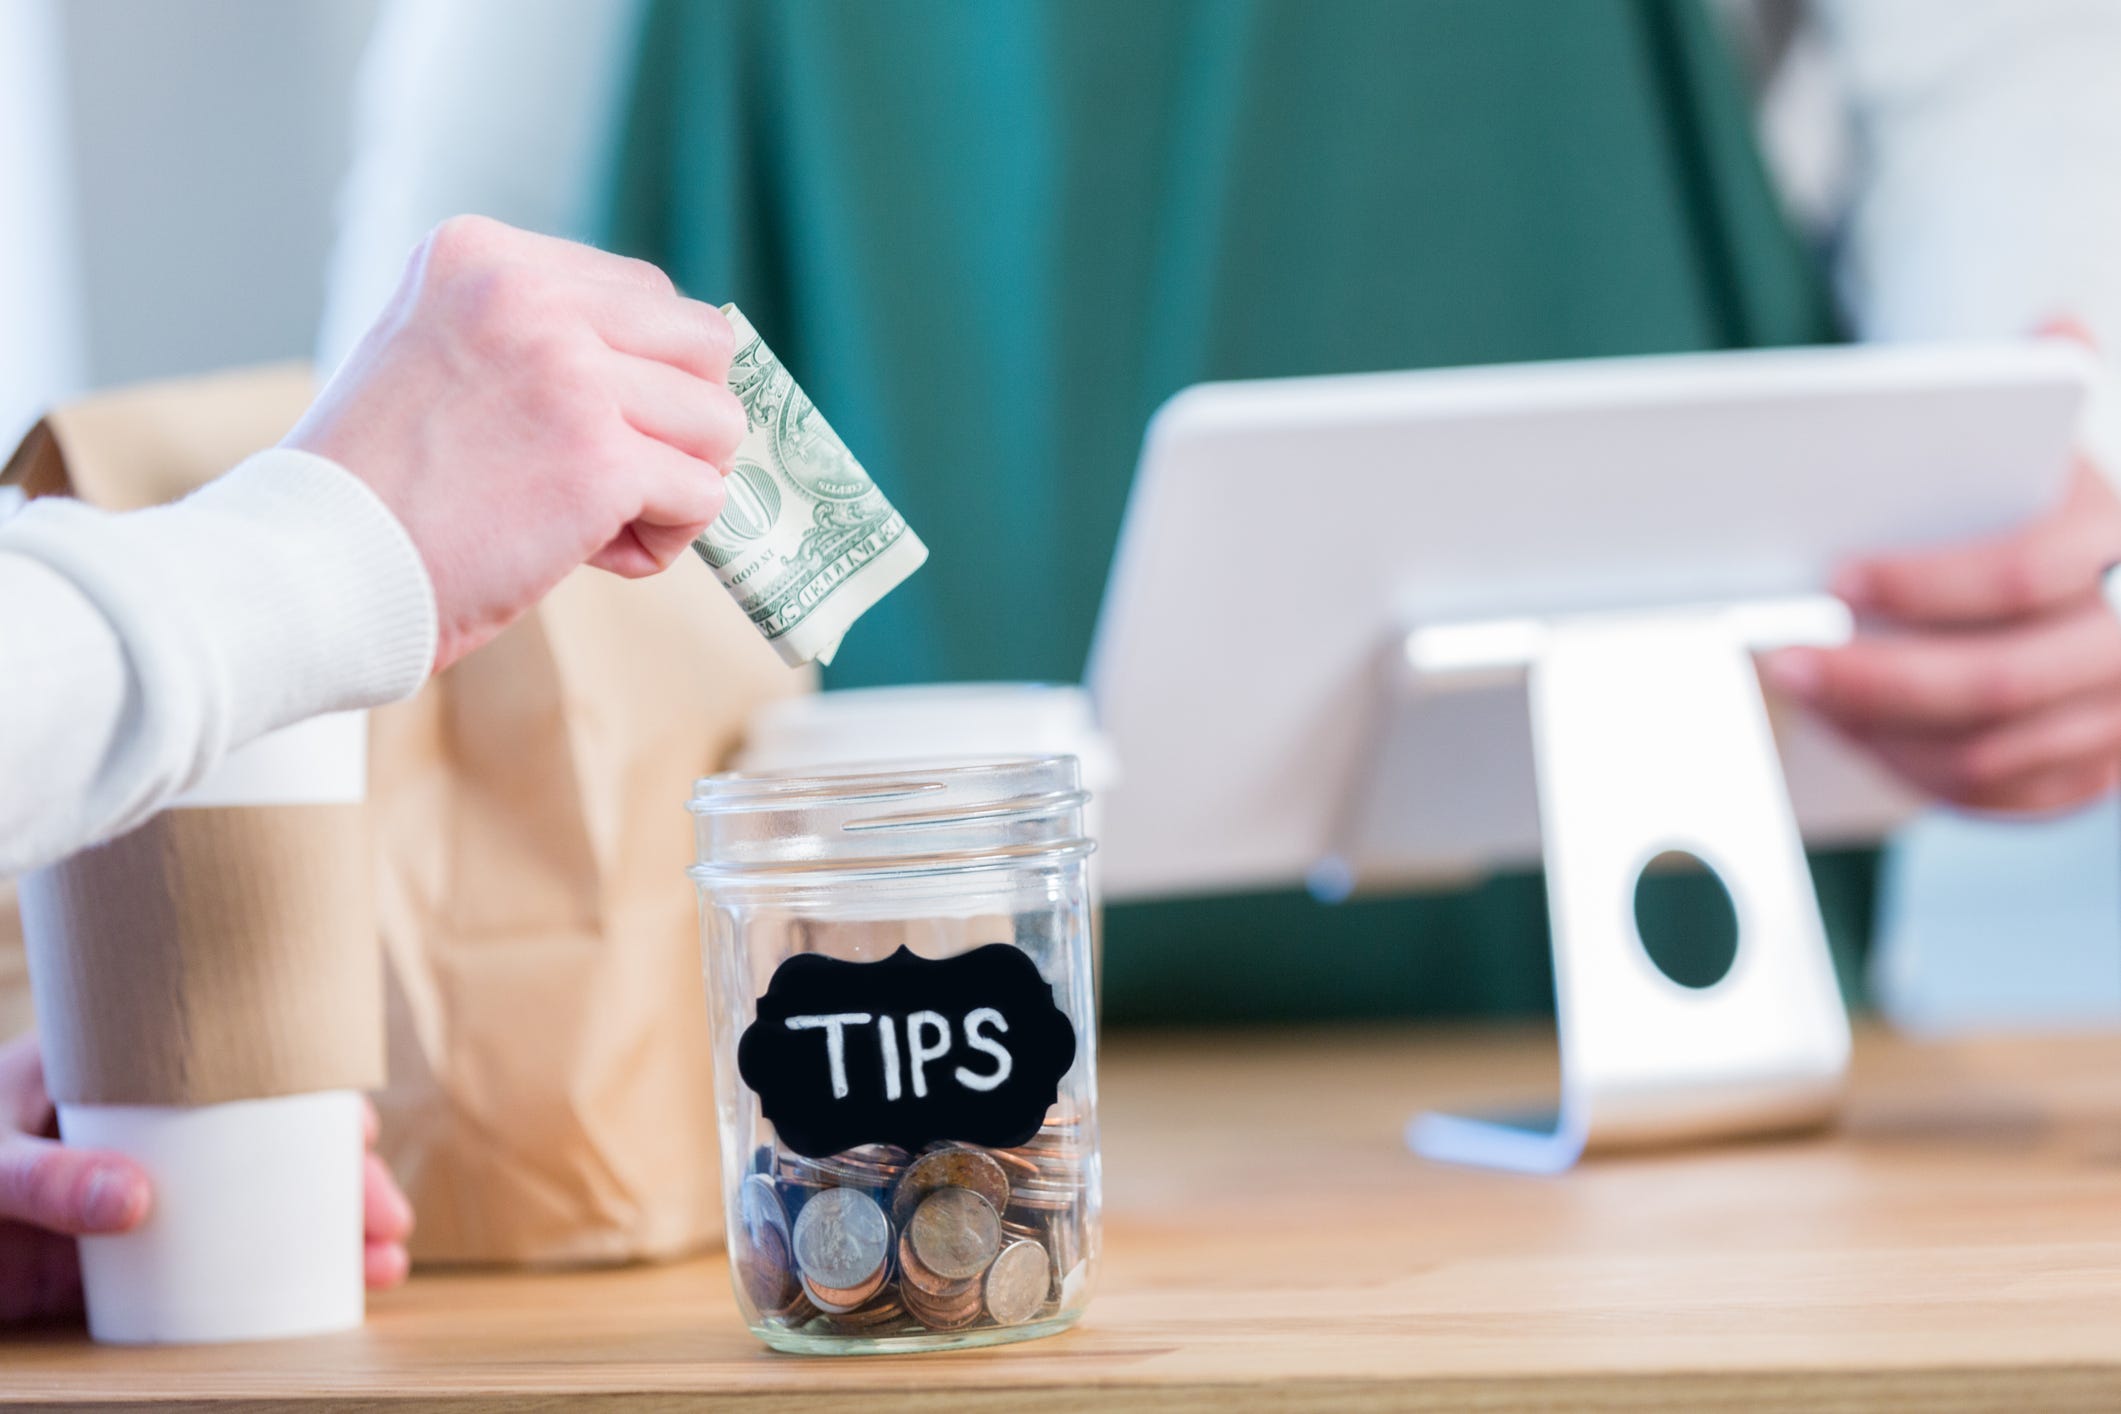 americans are reluctantly spending $500 a year tipping, new a study says.